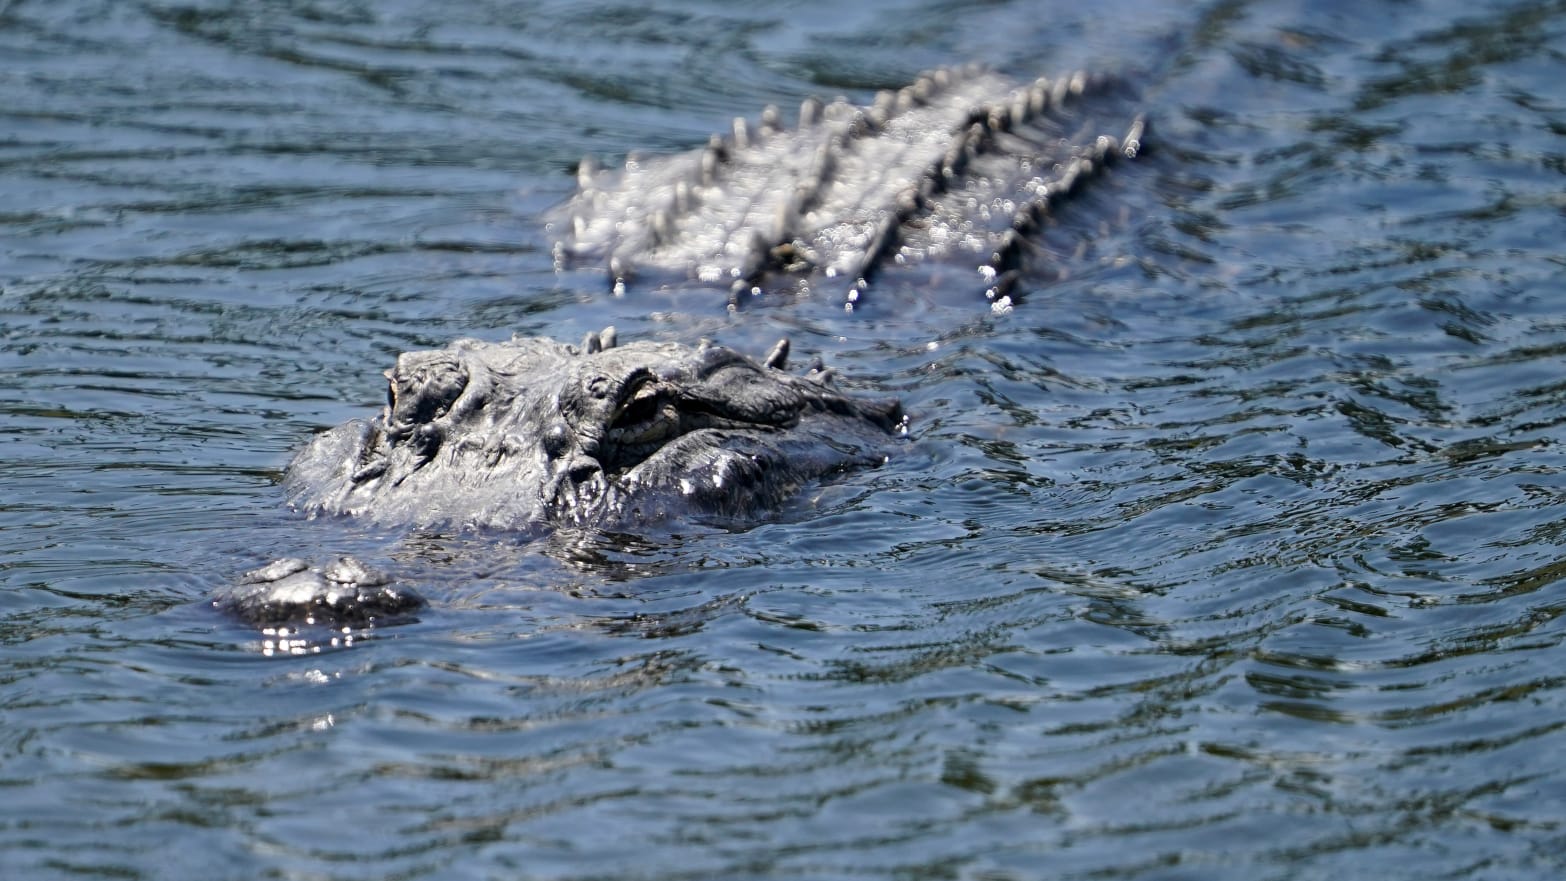 An alligator is seen in the water of a pond during a professional golf tournament in Florida.